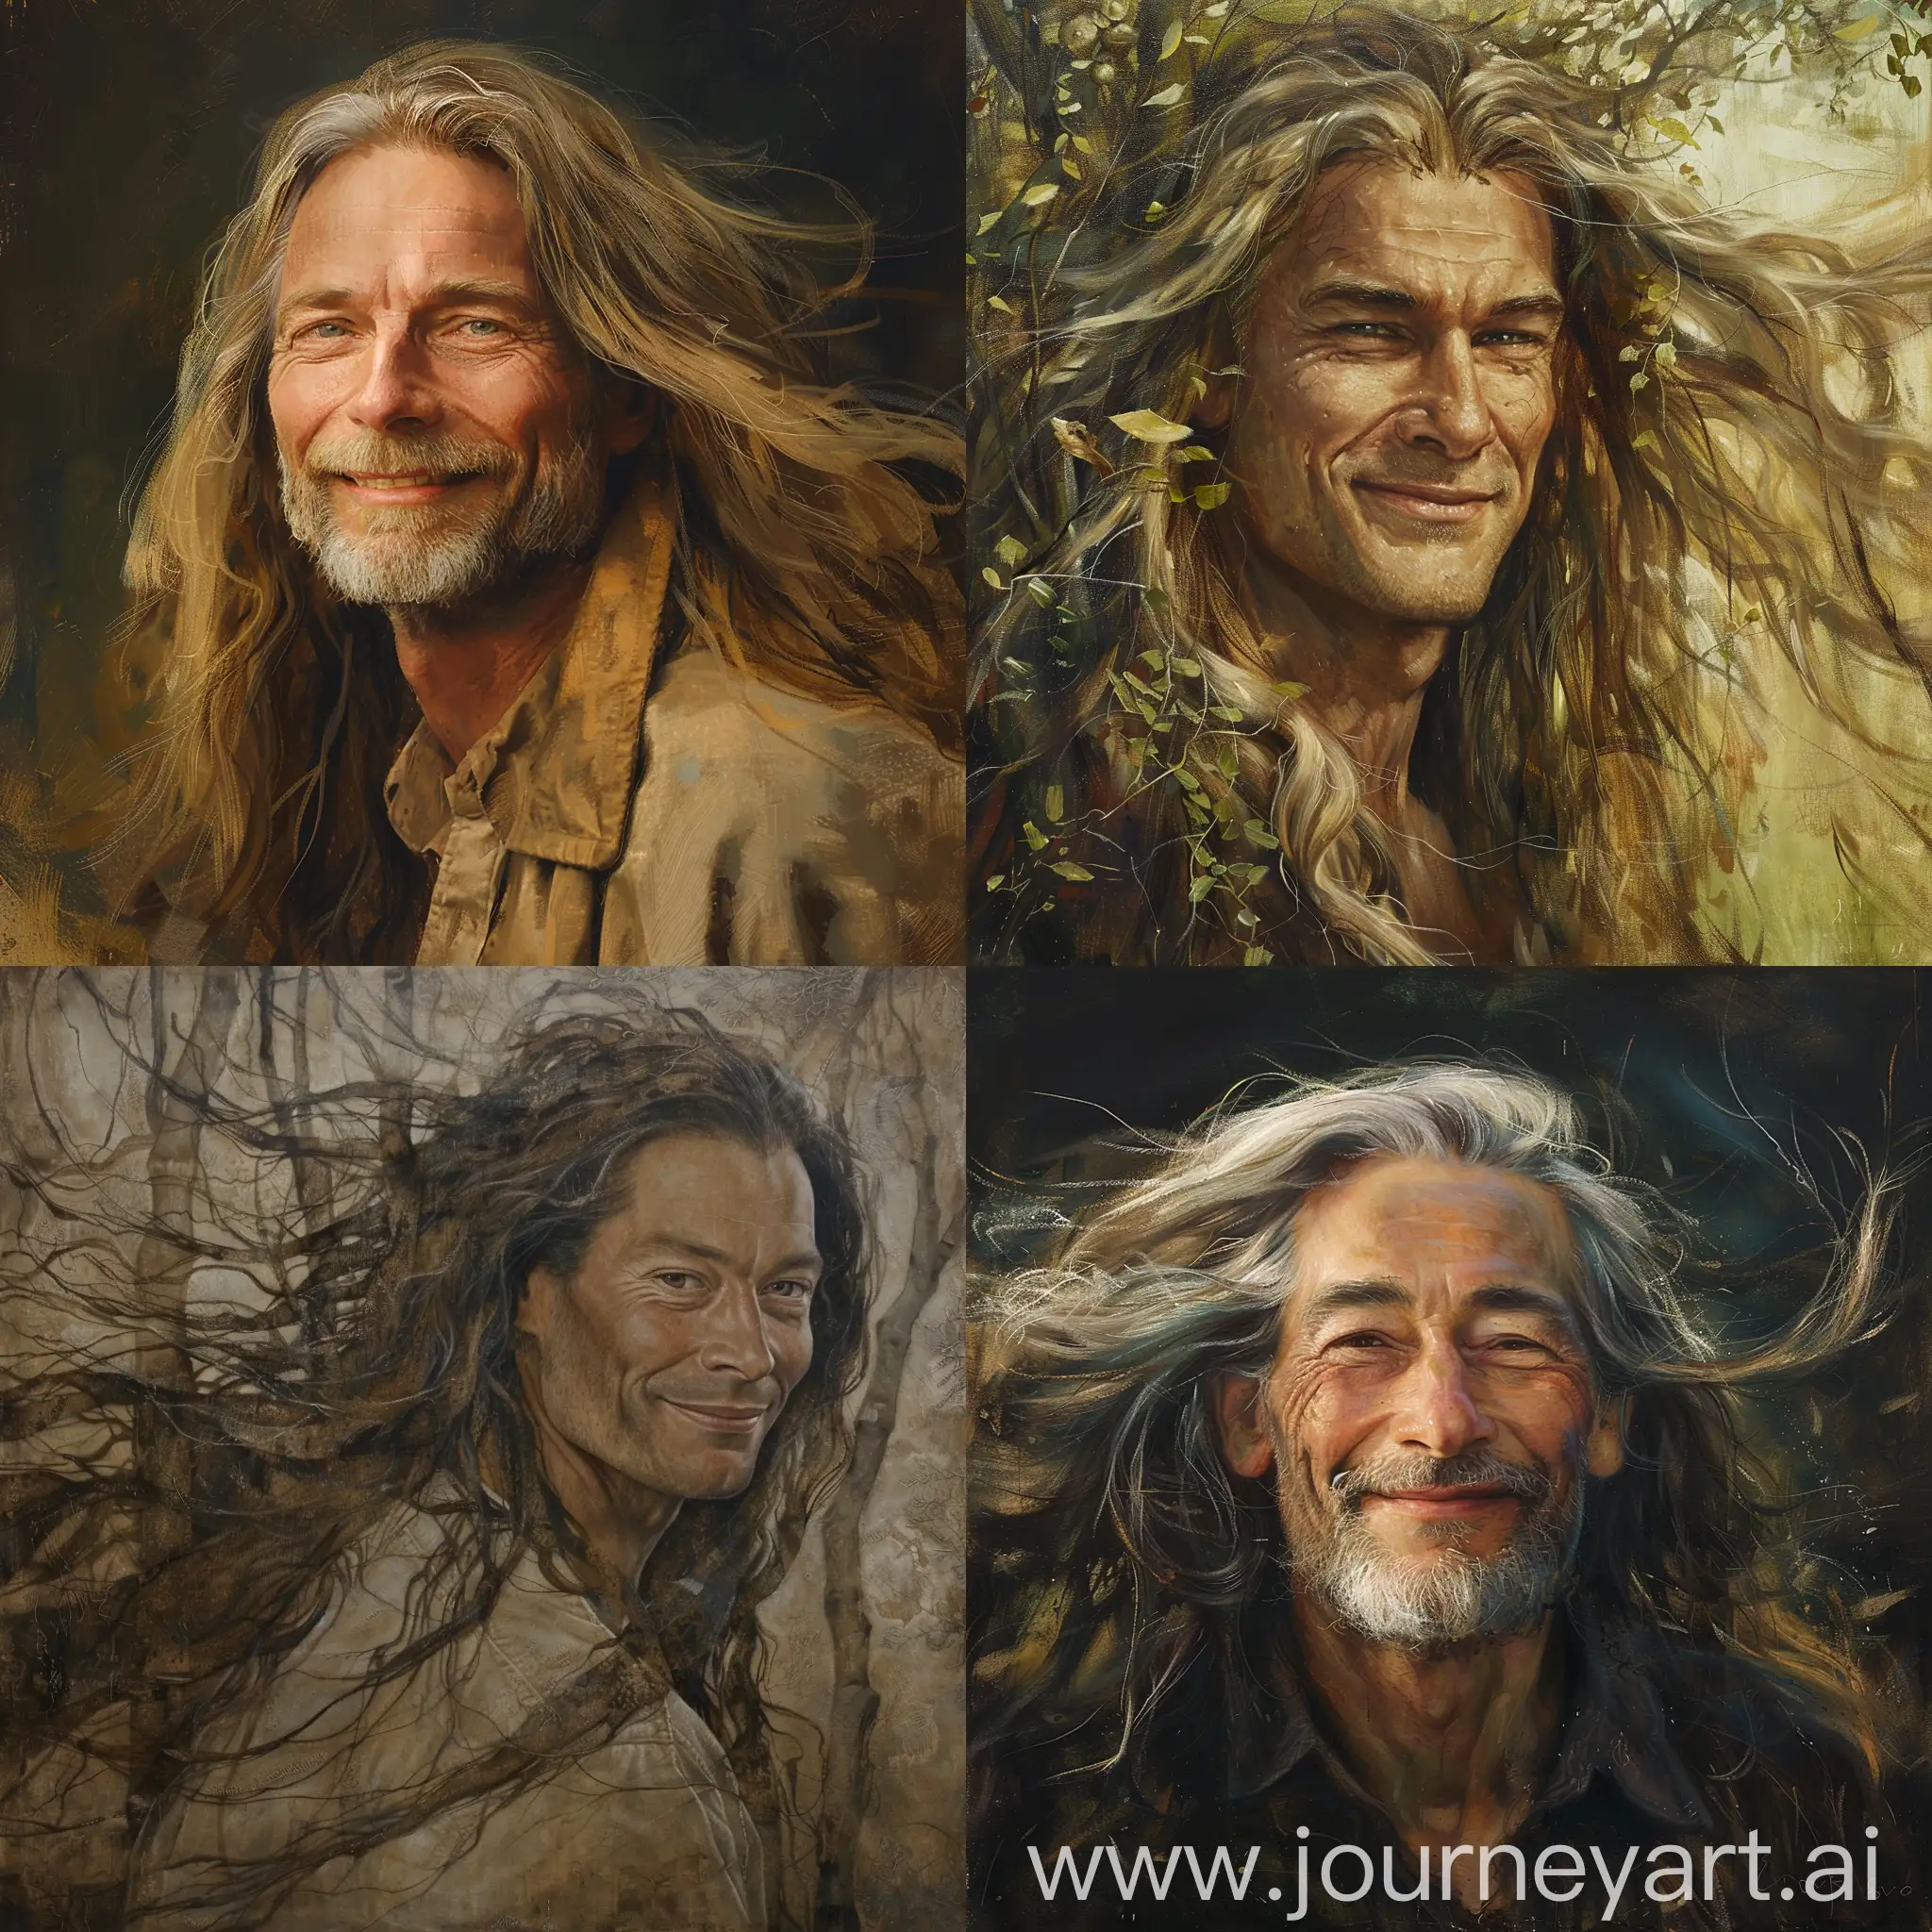 
"The father, Noah, is a man characterized by wisdom and tenderness, embodying the heart and soul of the home. With his long hair gently swaying in the breeze, he appears as a forest of stories and experiences. His appearance exudes calmness and dignity, with a warm smile that always reflects peace and security. The artist only needs his gentle features and wise eyes to depict him as he is, a loving and influential father."